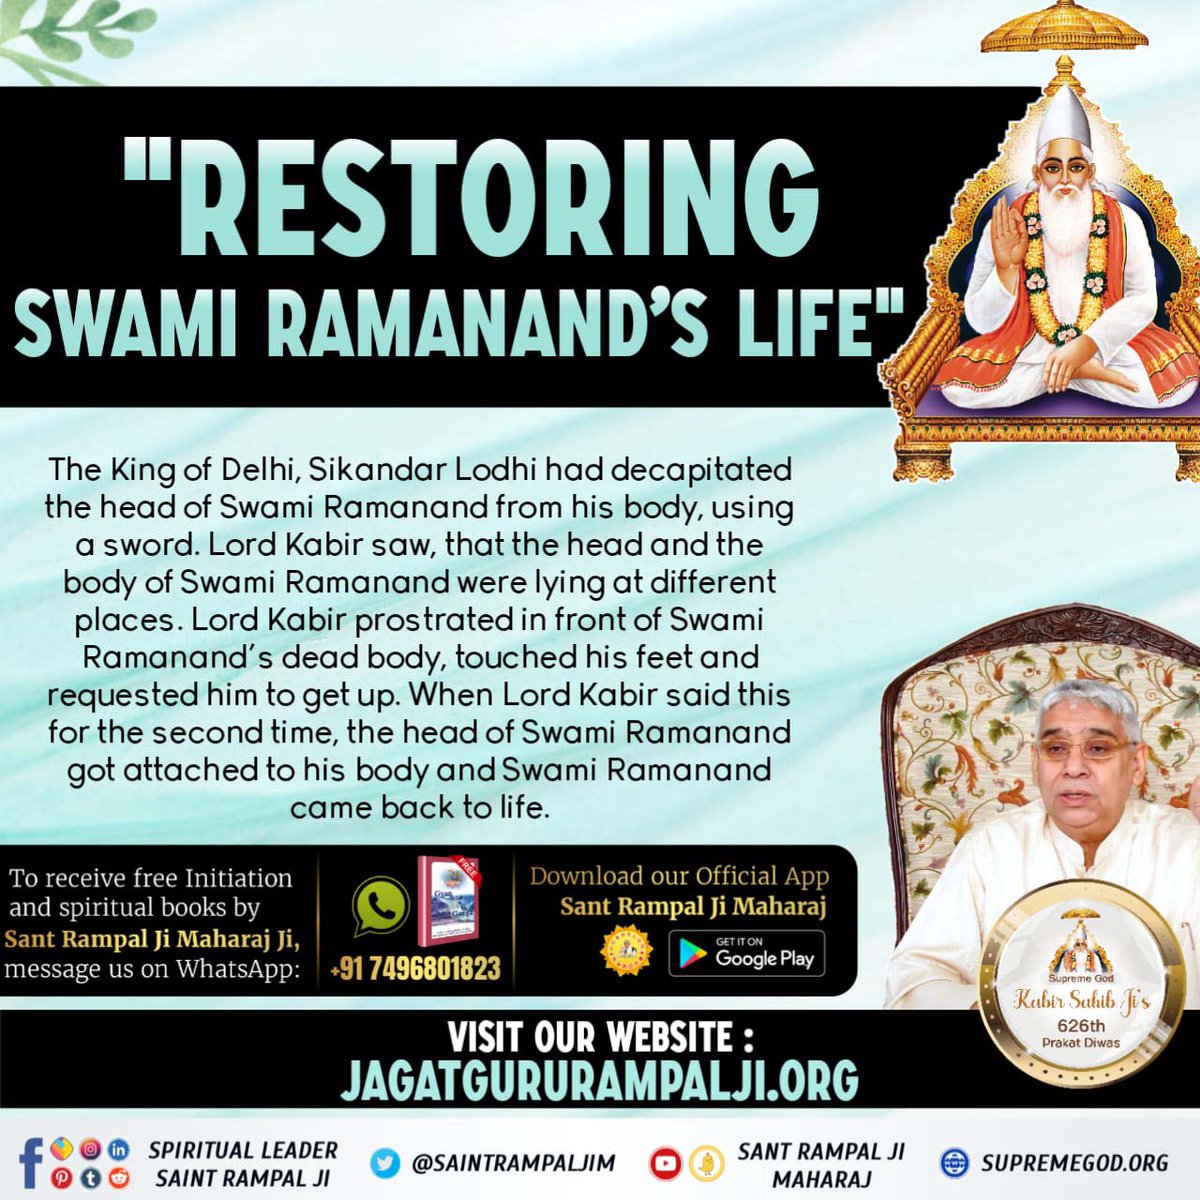 #GodMorningFriday
King Sikandar Lodi of Delhi had cut Swami Ramanand Ji into two pieces with a sword, which was revived by God Kabir Ji with the power of his words.
#MysteryBehindGuruOfGodKabir